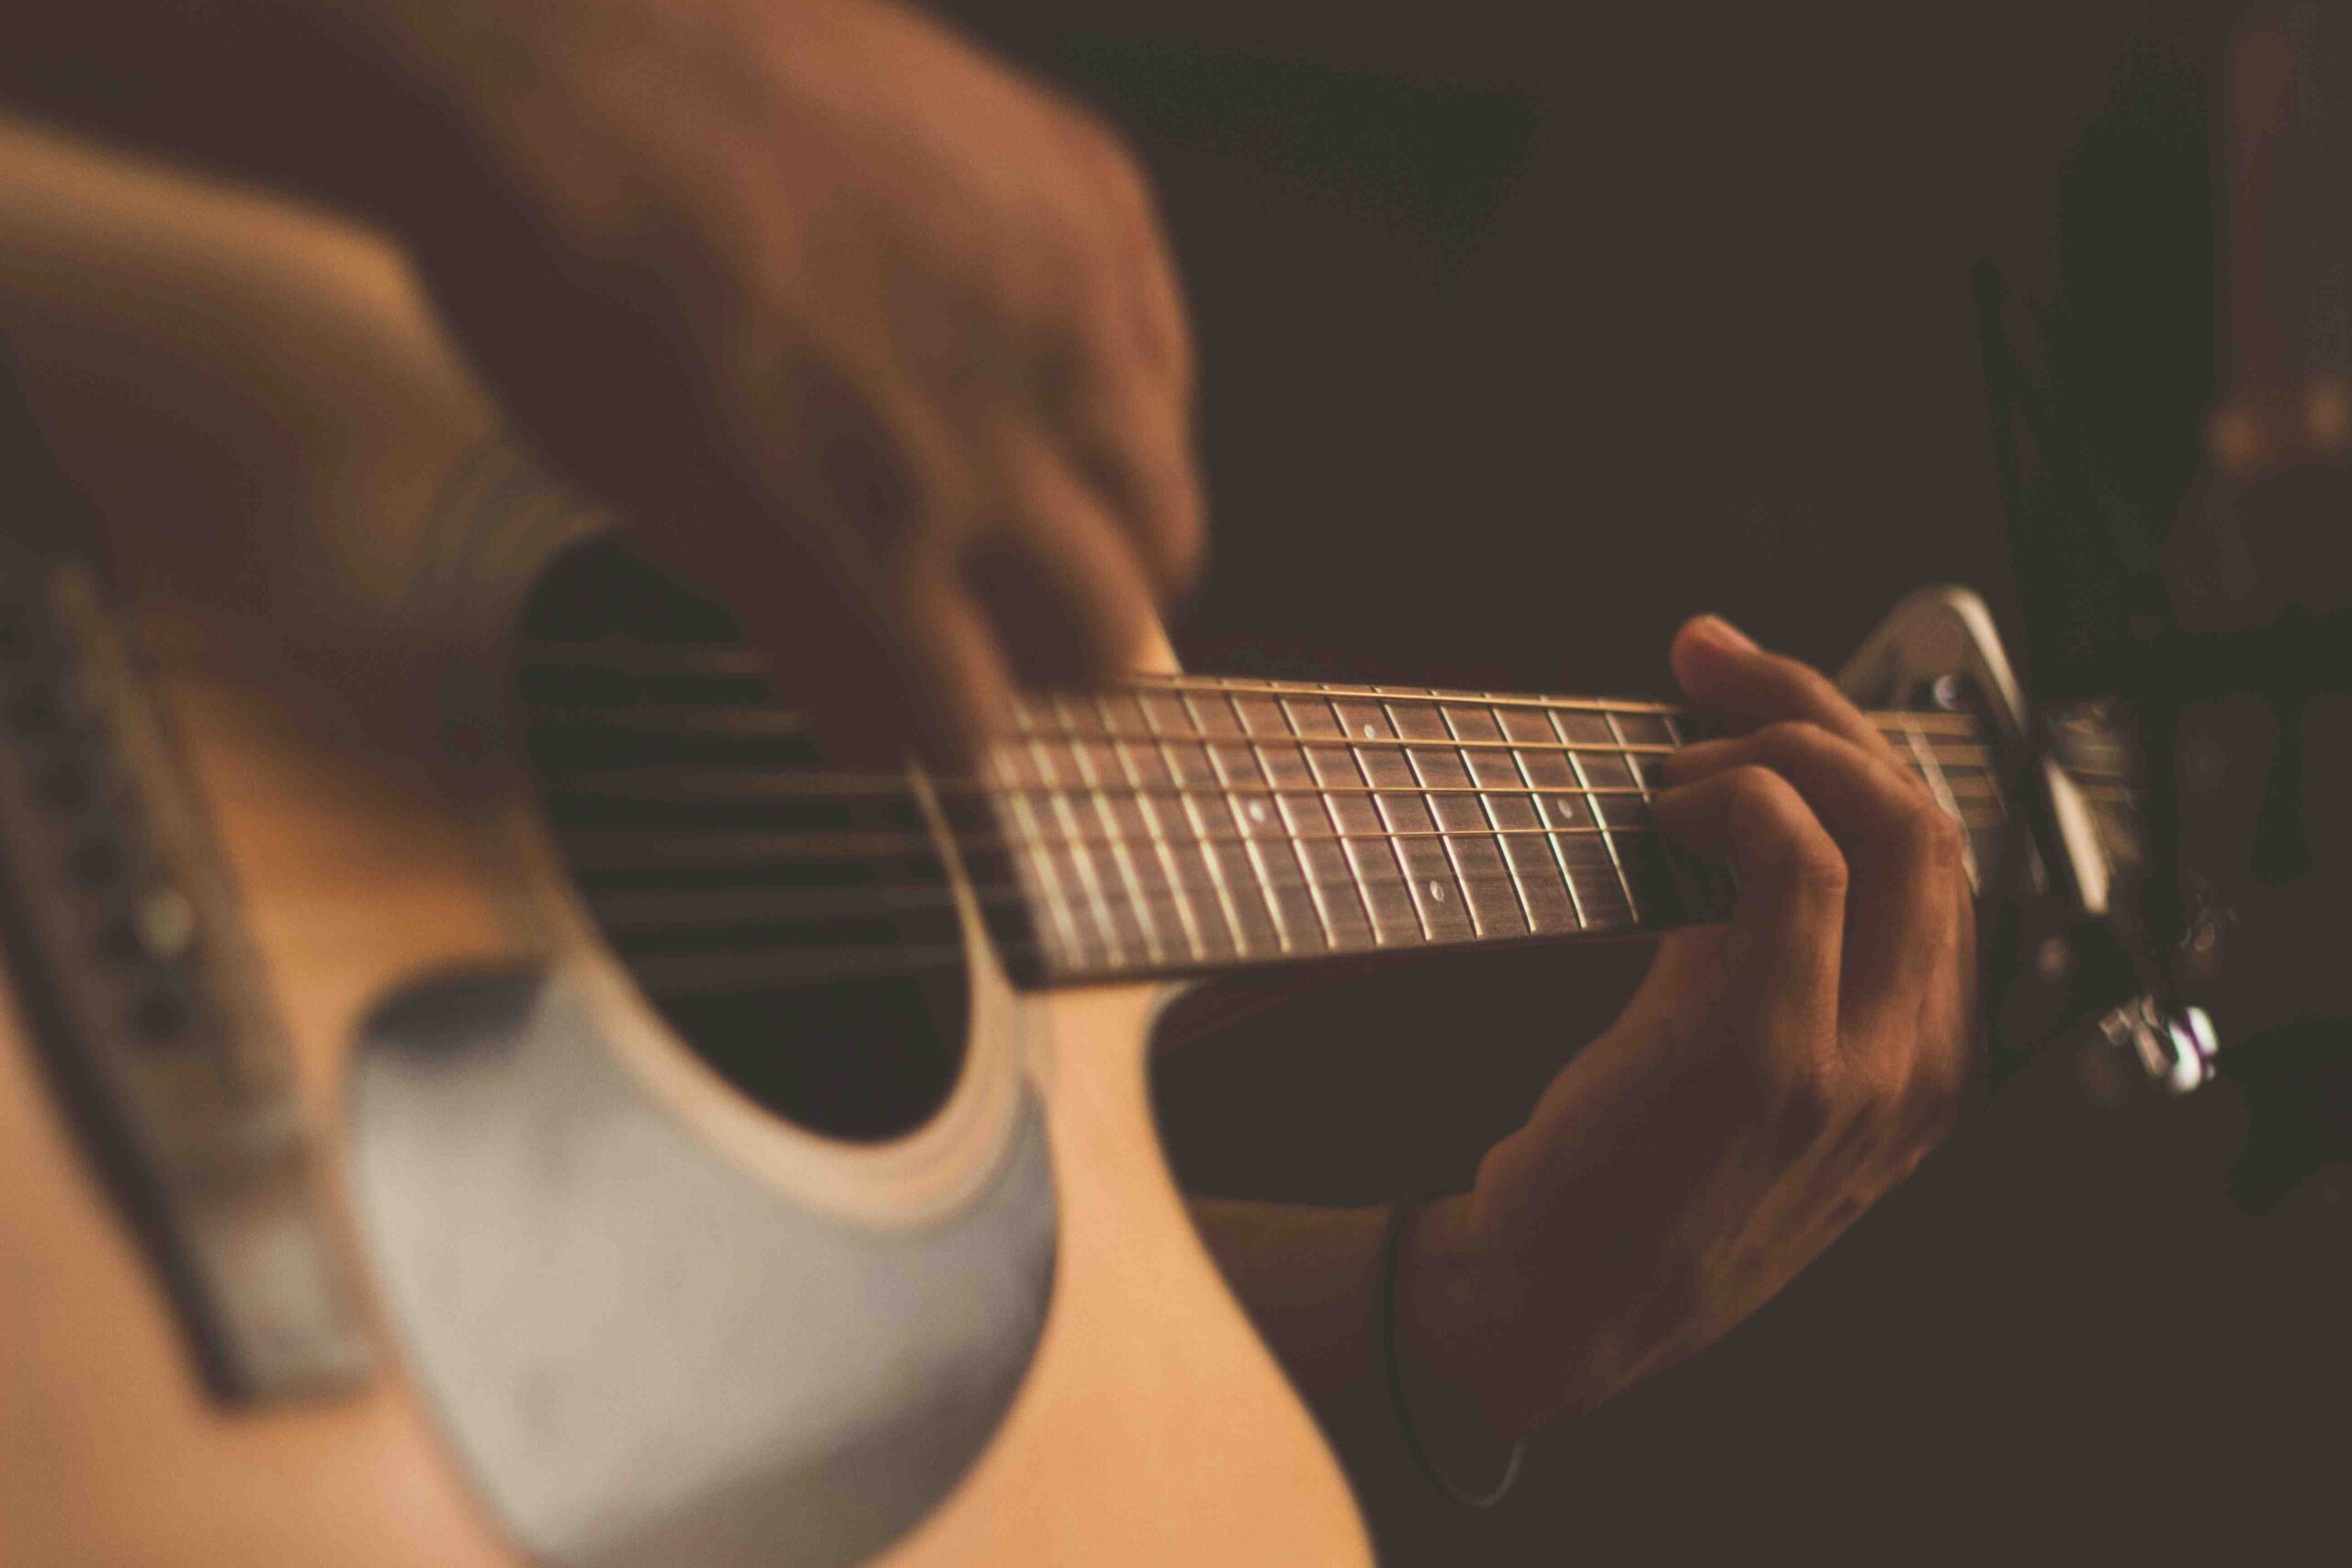 Guitar vs. Piano: Which Is Easier to Learn?